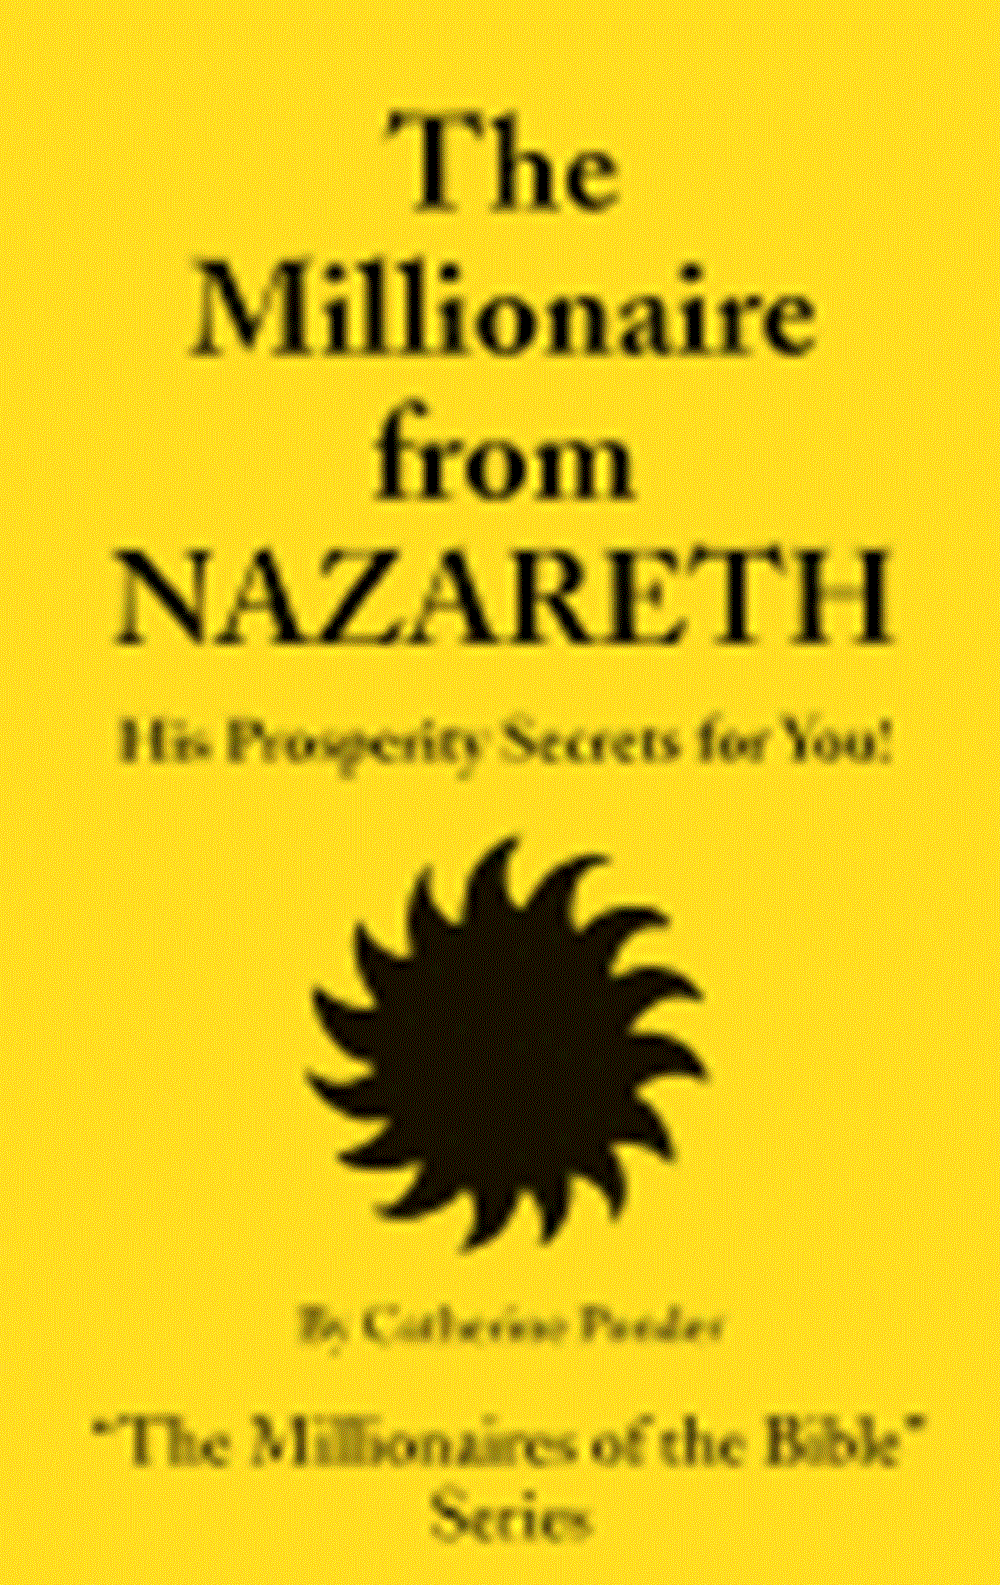 Millionaire from Nazareth: His Prosperity Secrets for You! (Millionaires of the Bible Series) (Revis